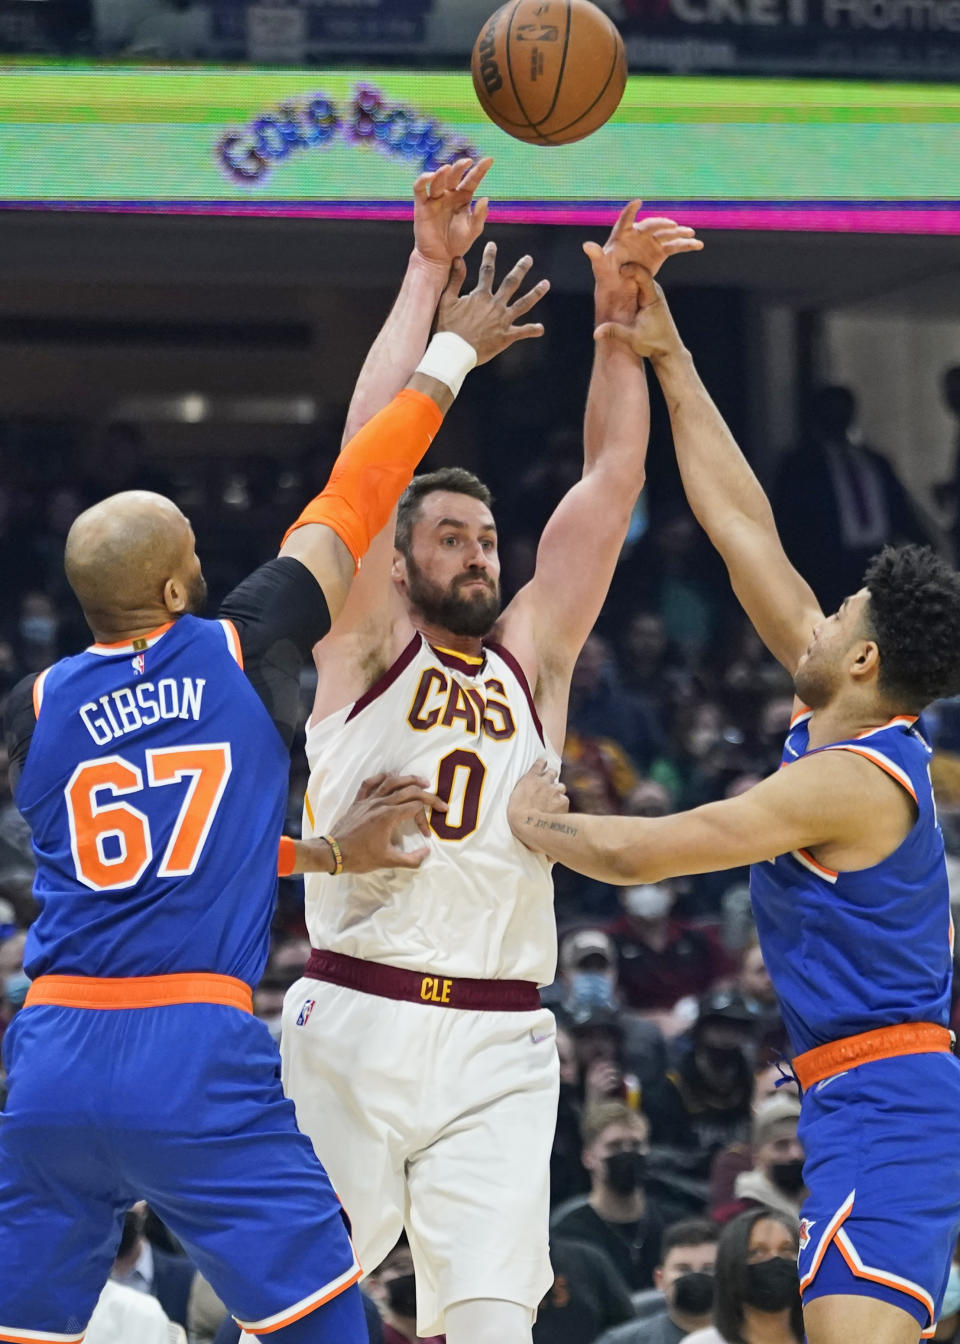 Cleveland Cavaliers' Kevin Love (0) passes over New York Knicks' Taj Gibson (67) and Quentin Grimes (6) in the first half of an NBA basketball game, Monday, Jan. 24, 2022, in Cleveland. (AP Photo/Tony Dejak)